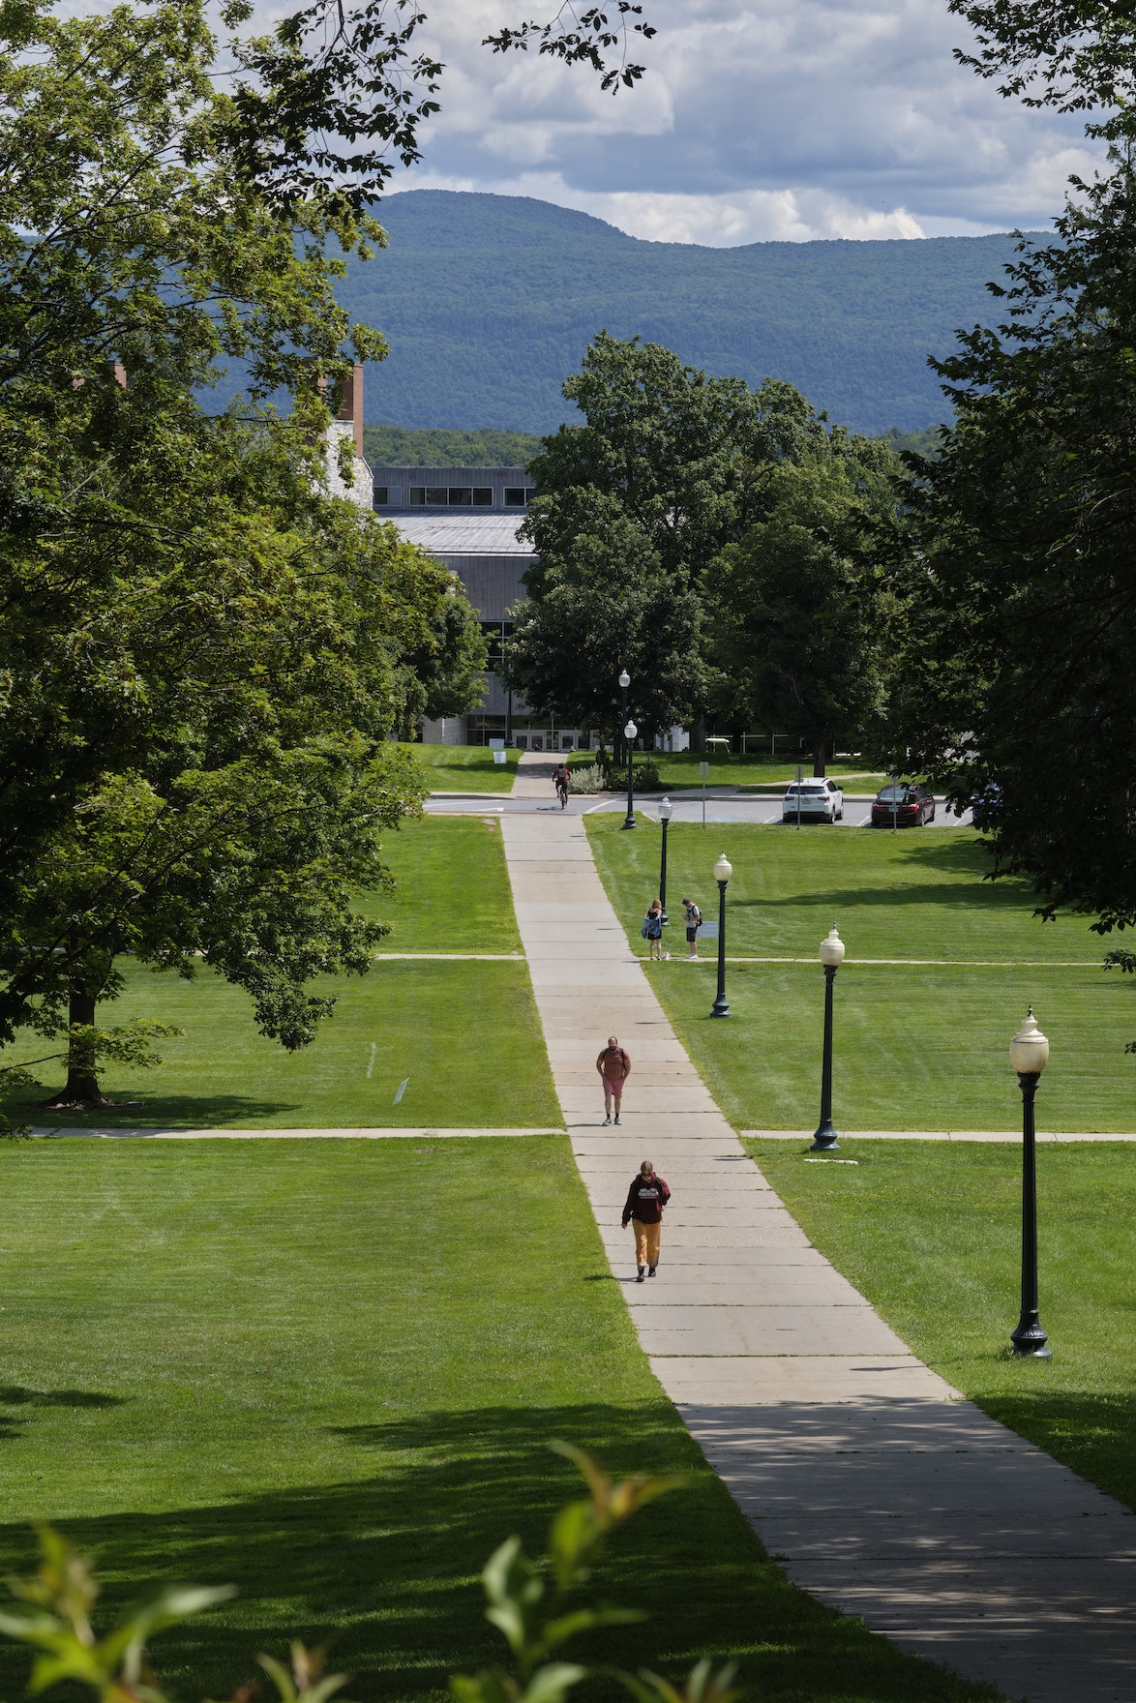 The Vermont mountains in the distance, and the Middlebury College campus in the foreground.